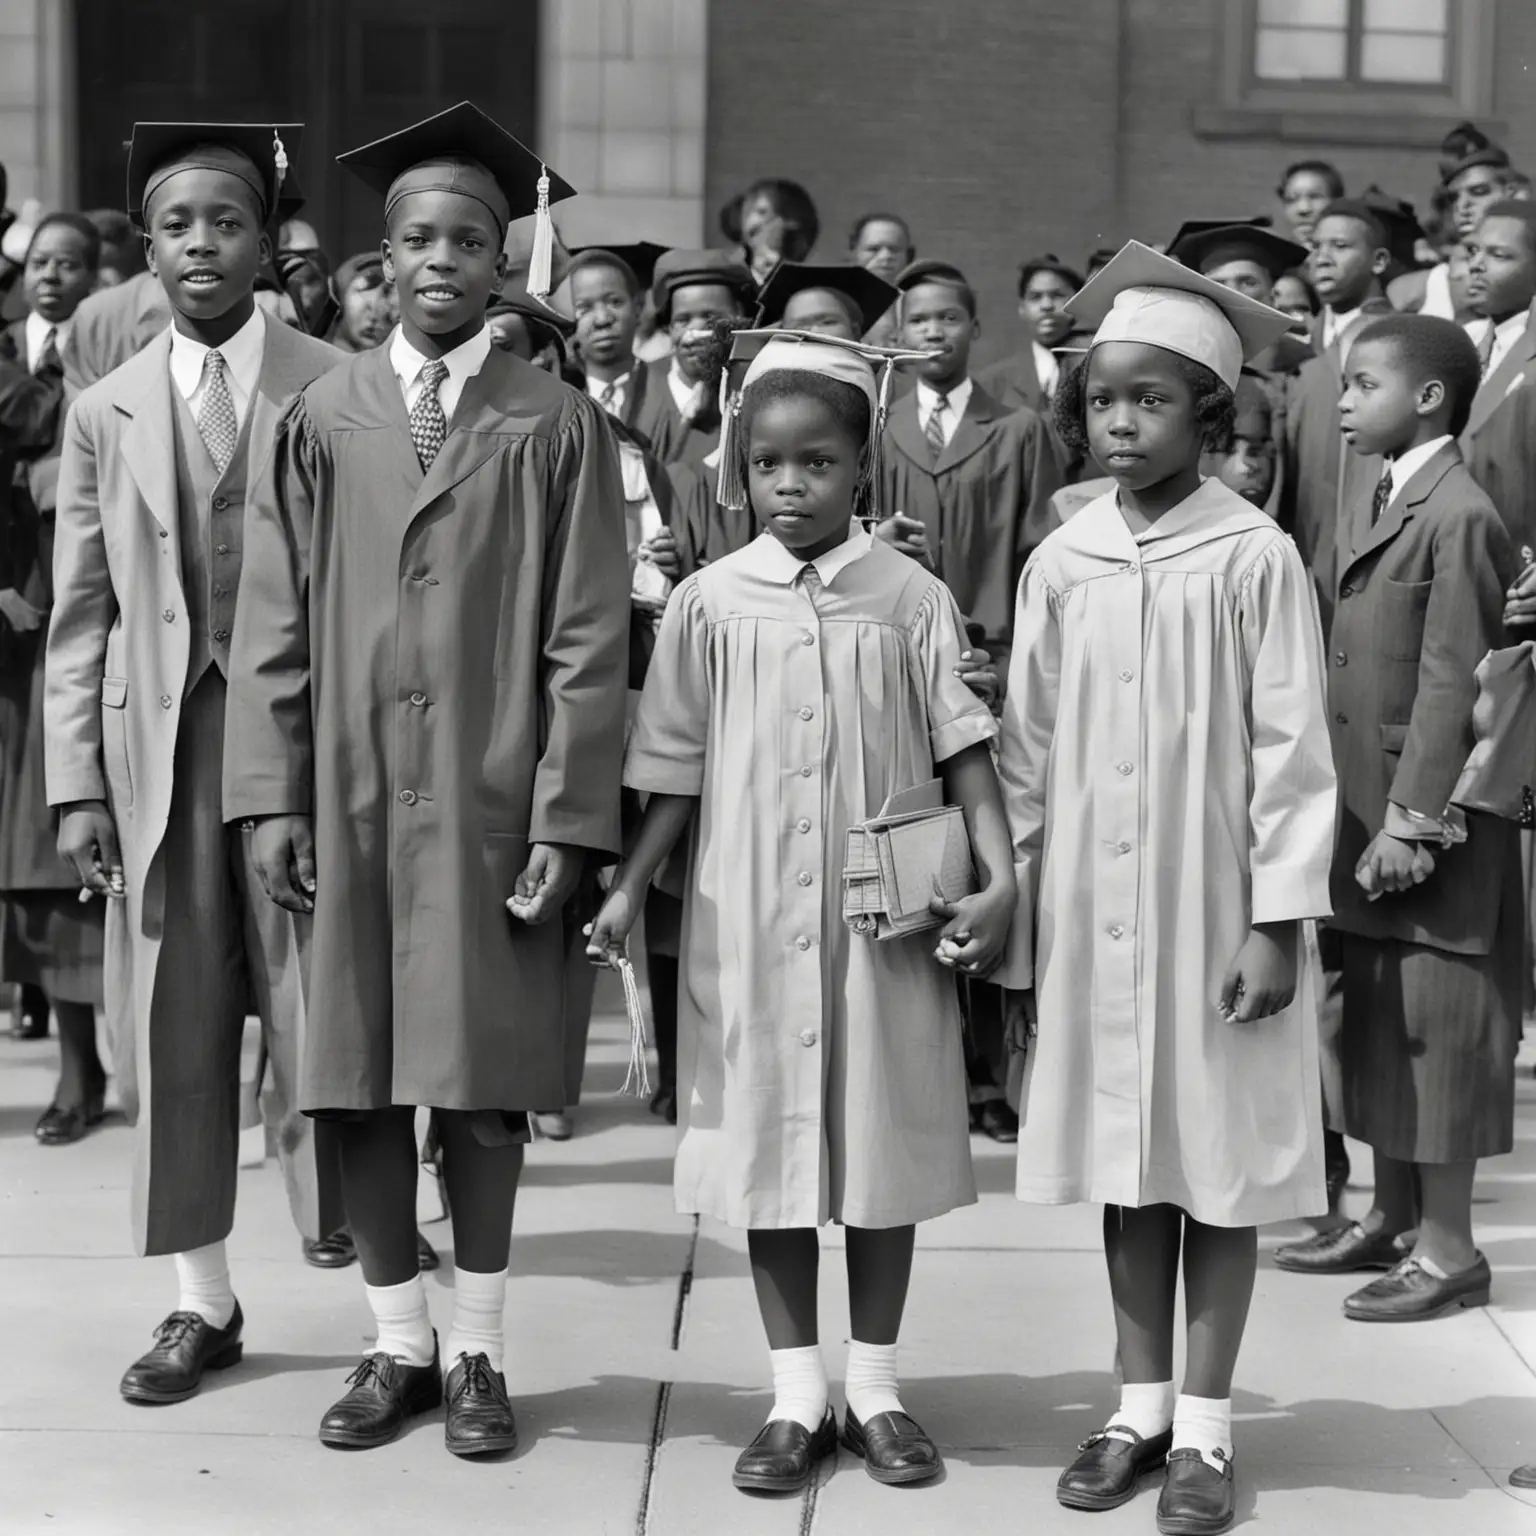 African American Children Celebrating Graduation in 1930s Style